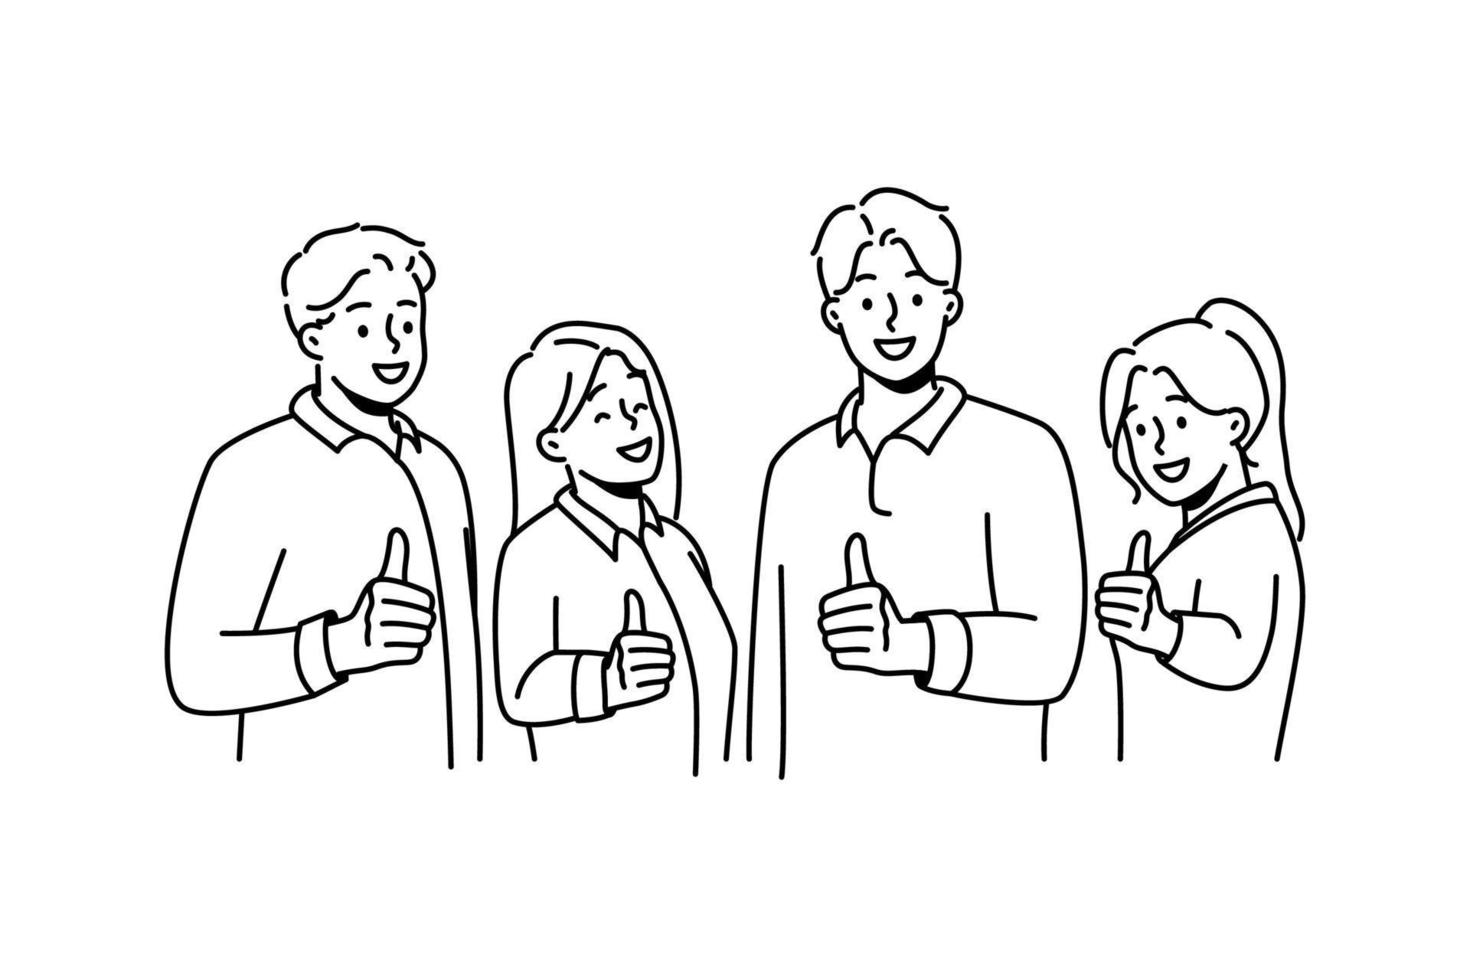 Smiling people showing thumbs up give recommendation to service. Happy team recommend good quality course or work. Employment concept. Vector illustration.